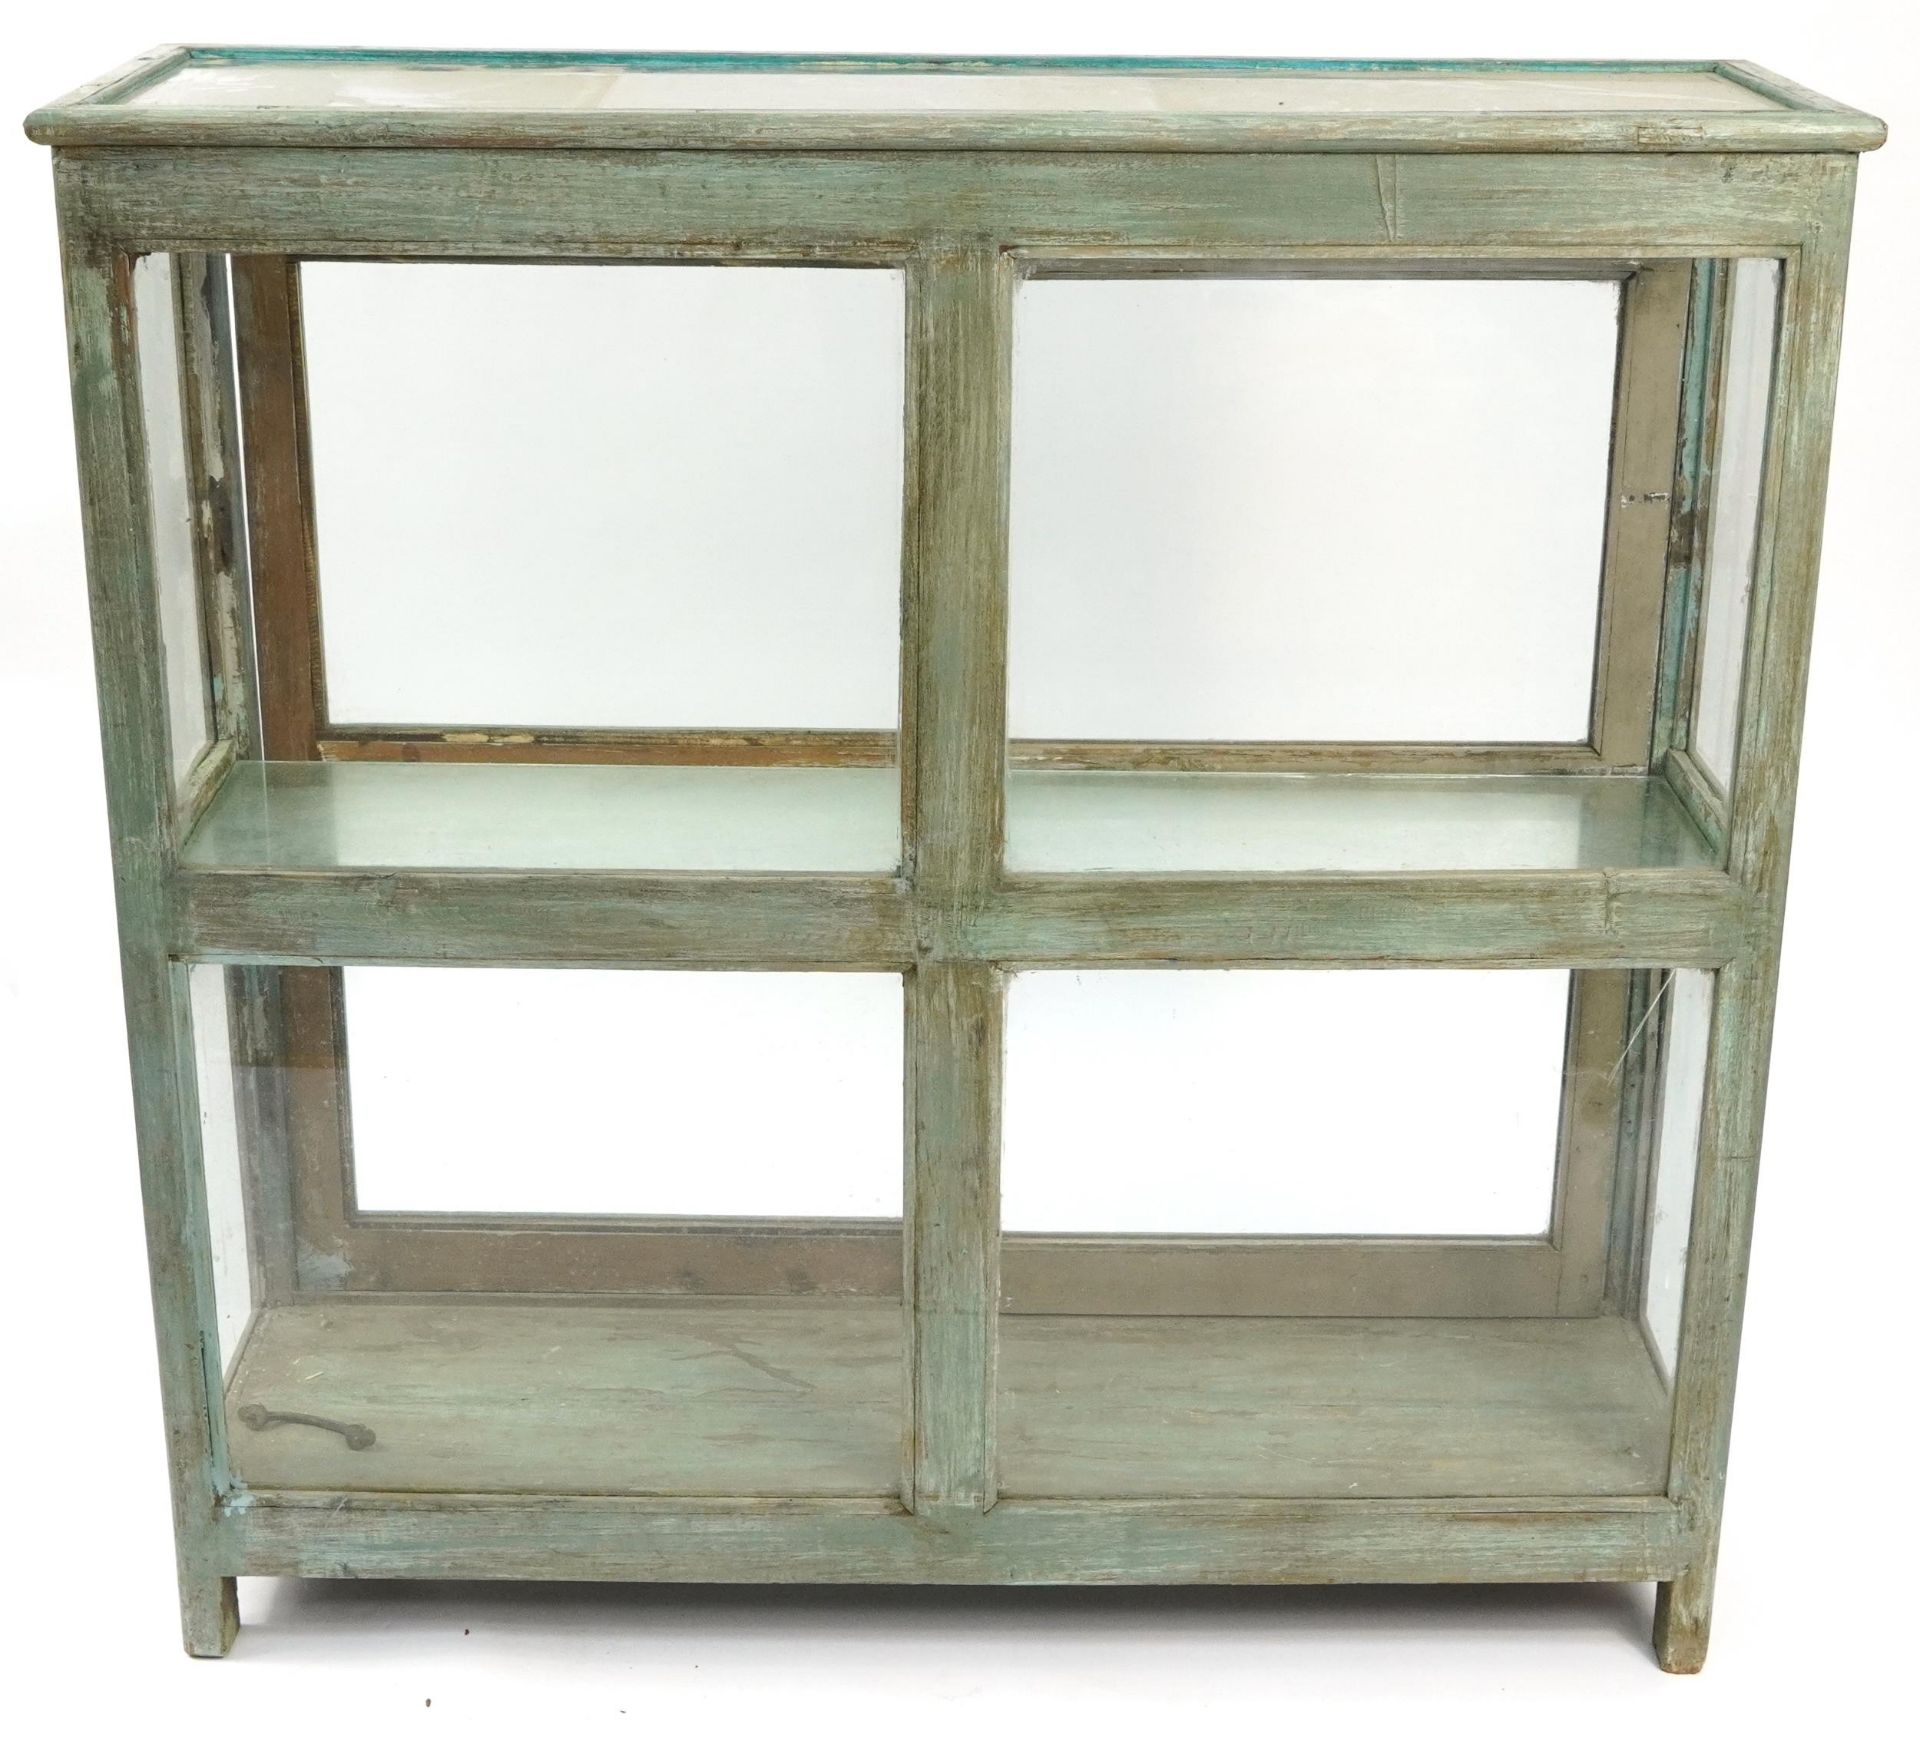 Shabby chic display case with sliding glass doors, 121cm H x 124cm W x 38.5cm D - Image 4 of 4